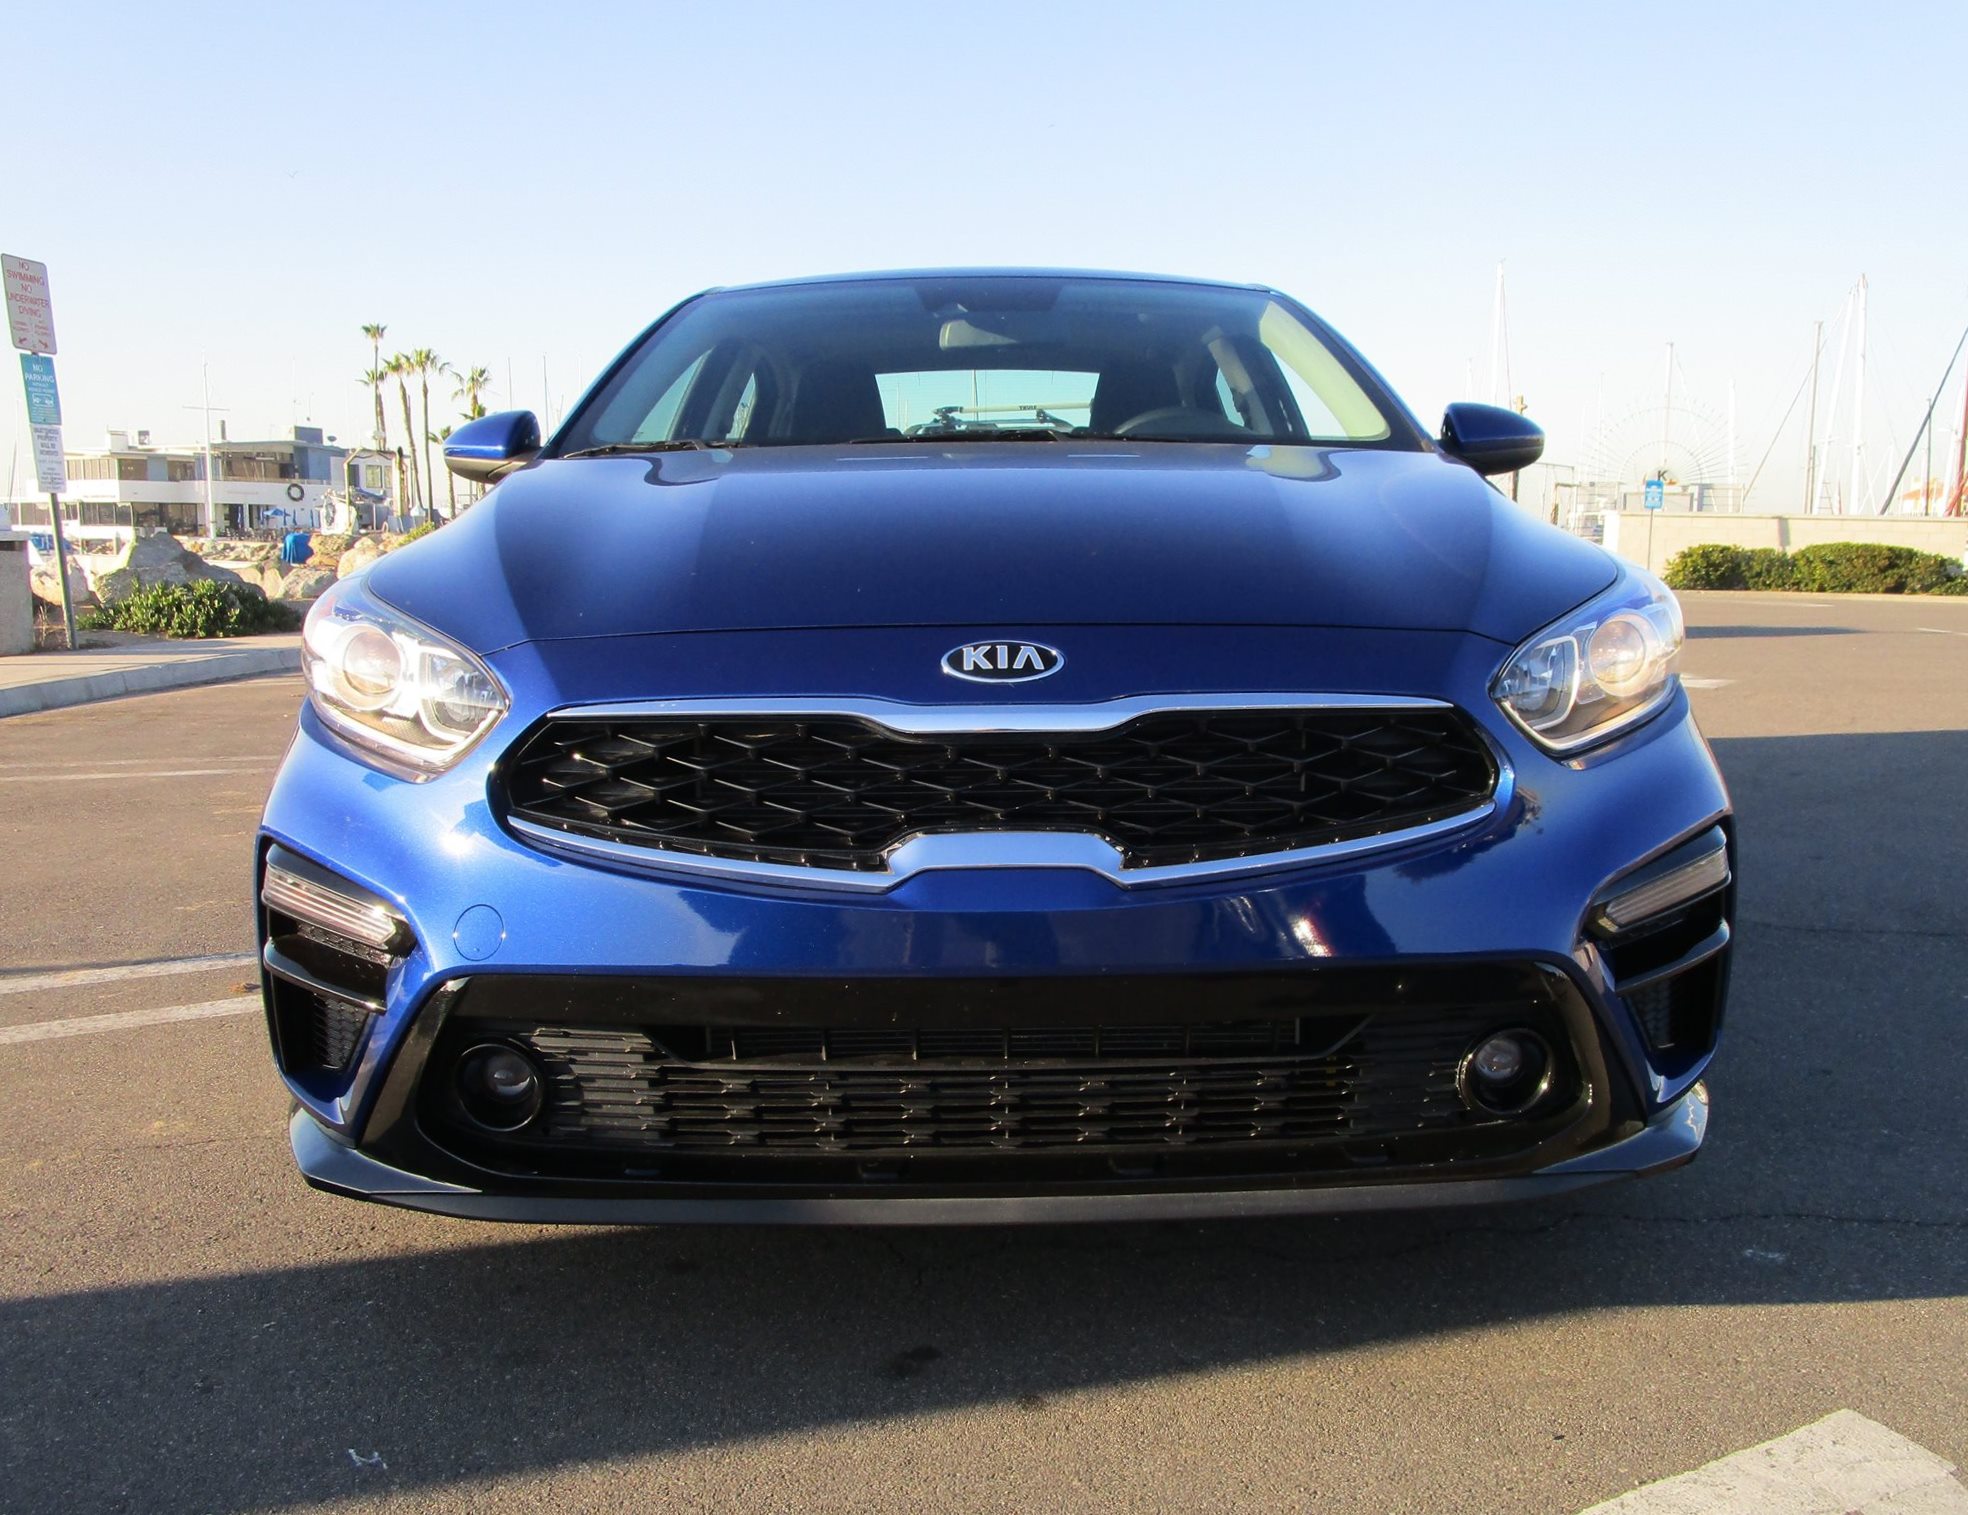 2019 Kia Forte S - Road Test Review - By Ben Lewis » CAR SHOPPING